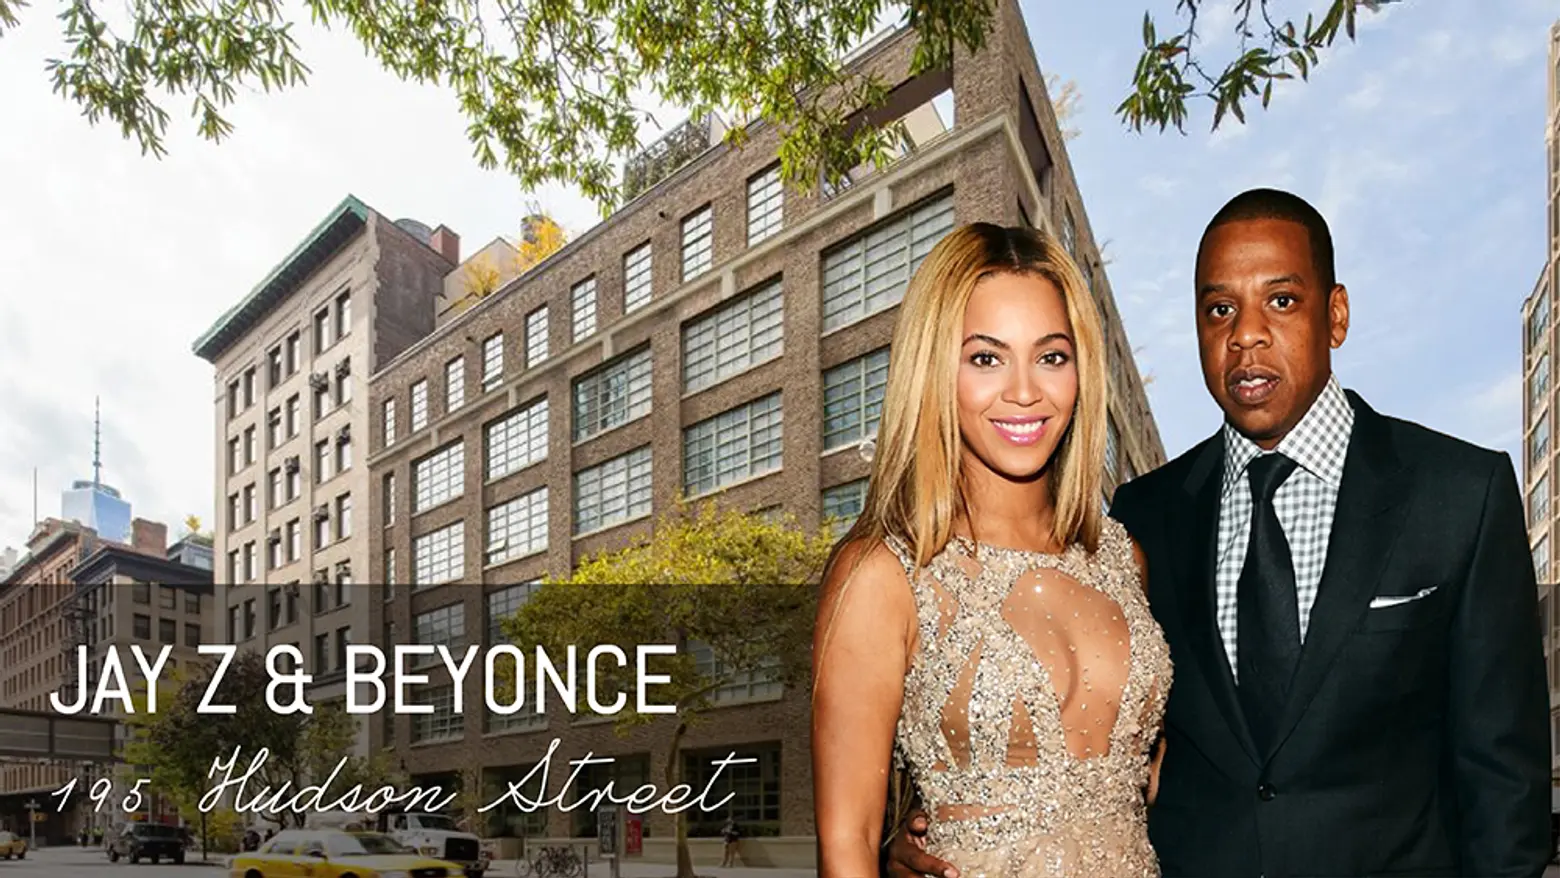 Sean Combs, Puff Daddy, Mariah Carey, Marc Anthony, Katy Perry, Justin TImberlake, Beyonce, Tribeca celebrities, Tribeca lofts, Tribeca penthouses